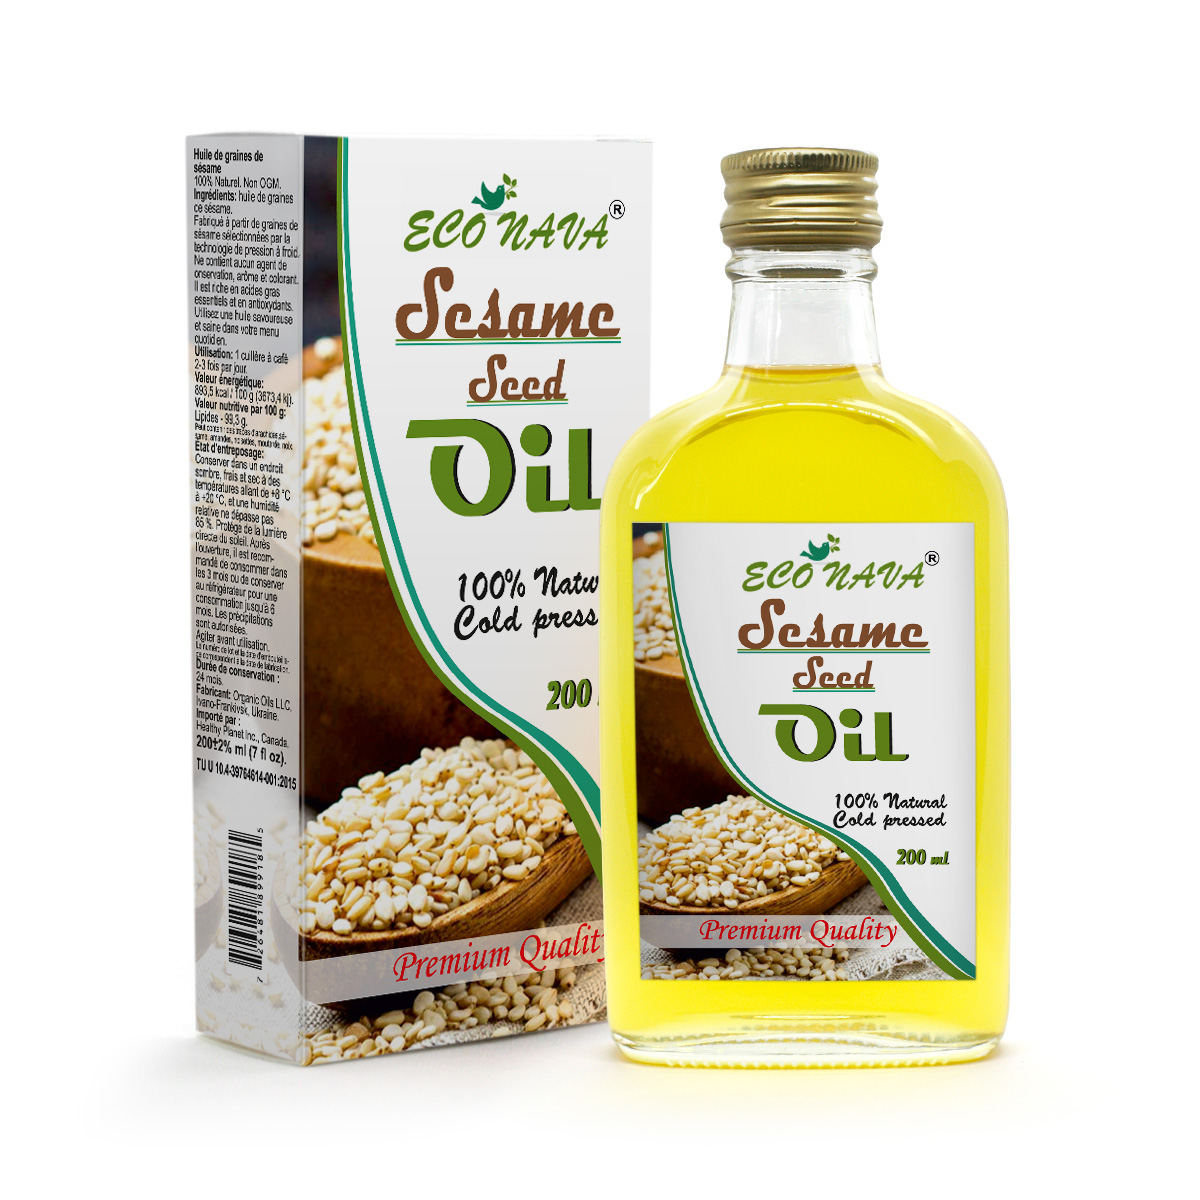 Sesame Oil Cold pressed sesame seeds 100% natural product, 100ml Unrefined